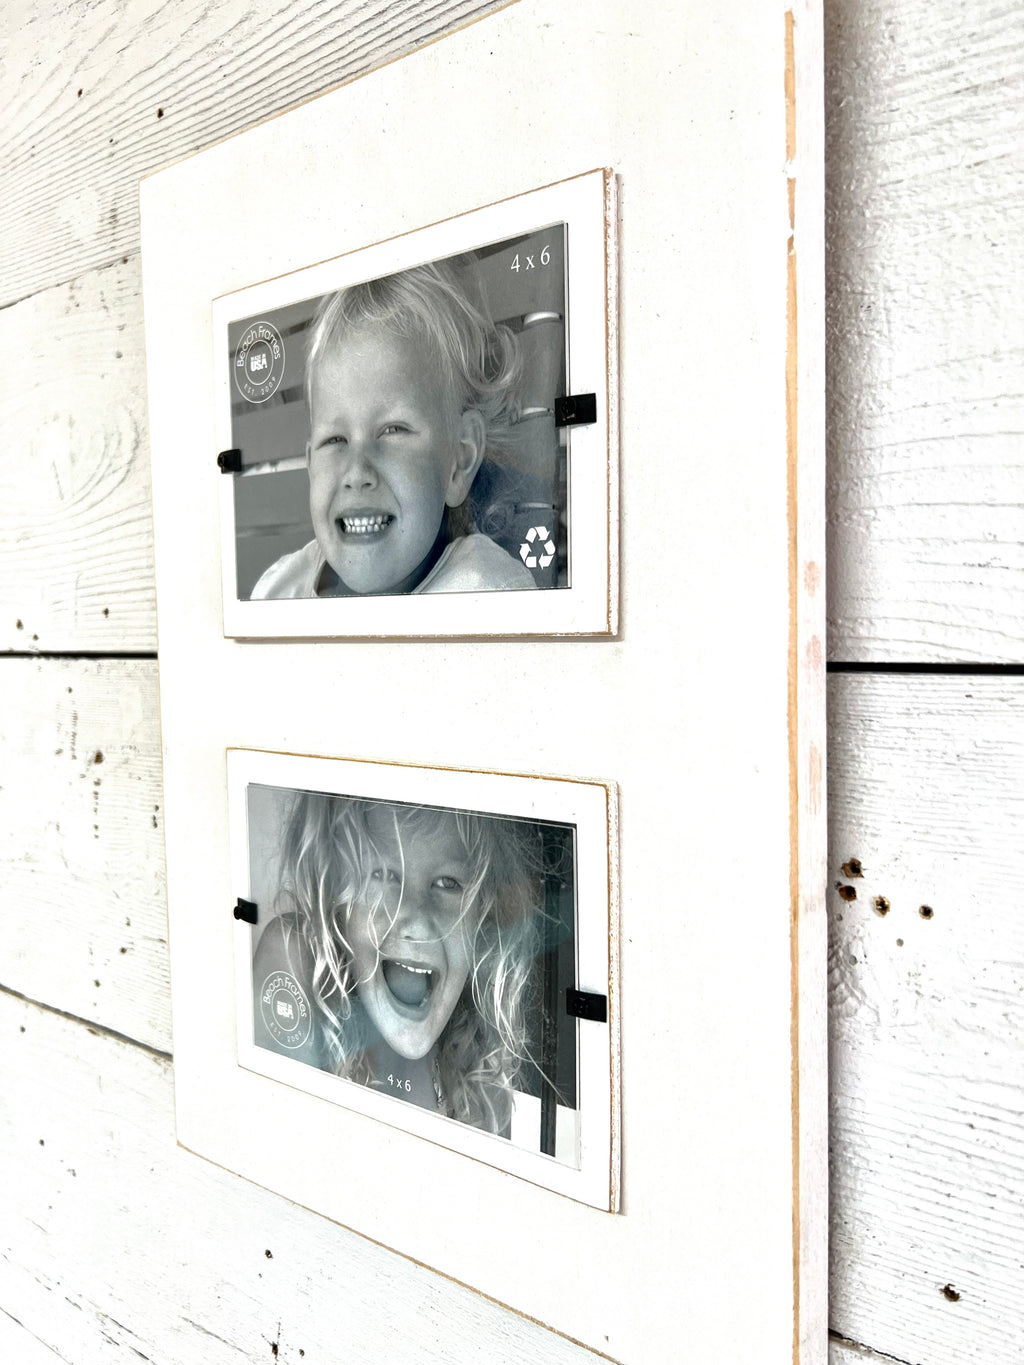 Personalized 4x6 Wood Picture Frame - Create Your Own Design